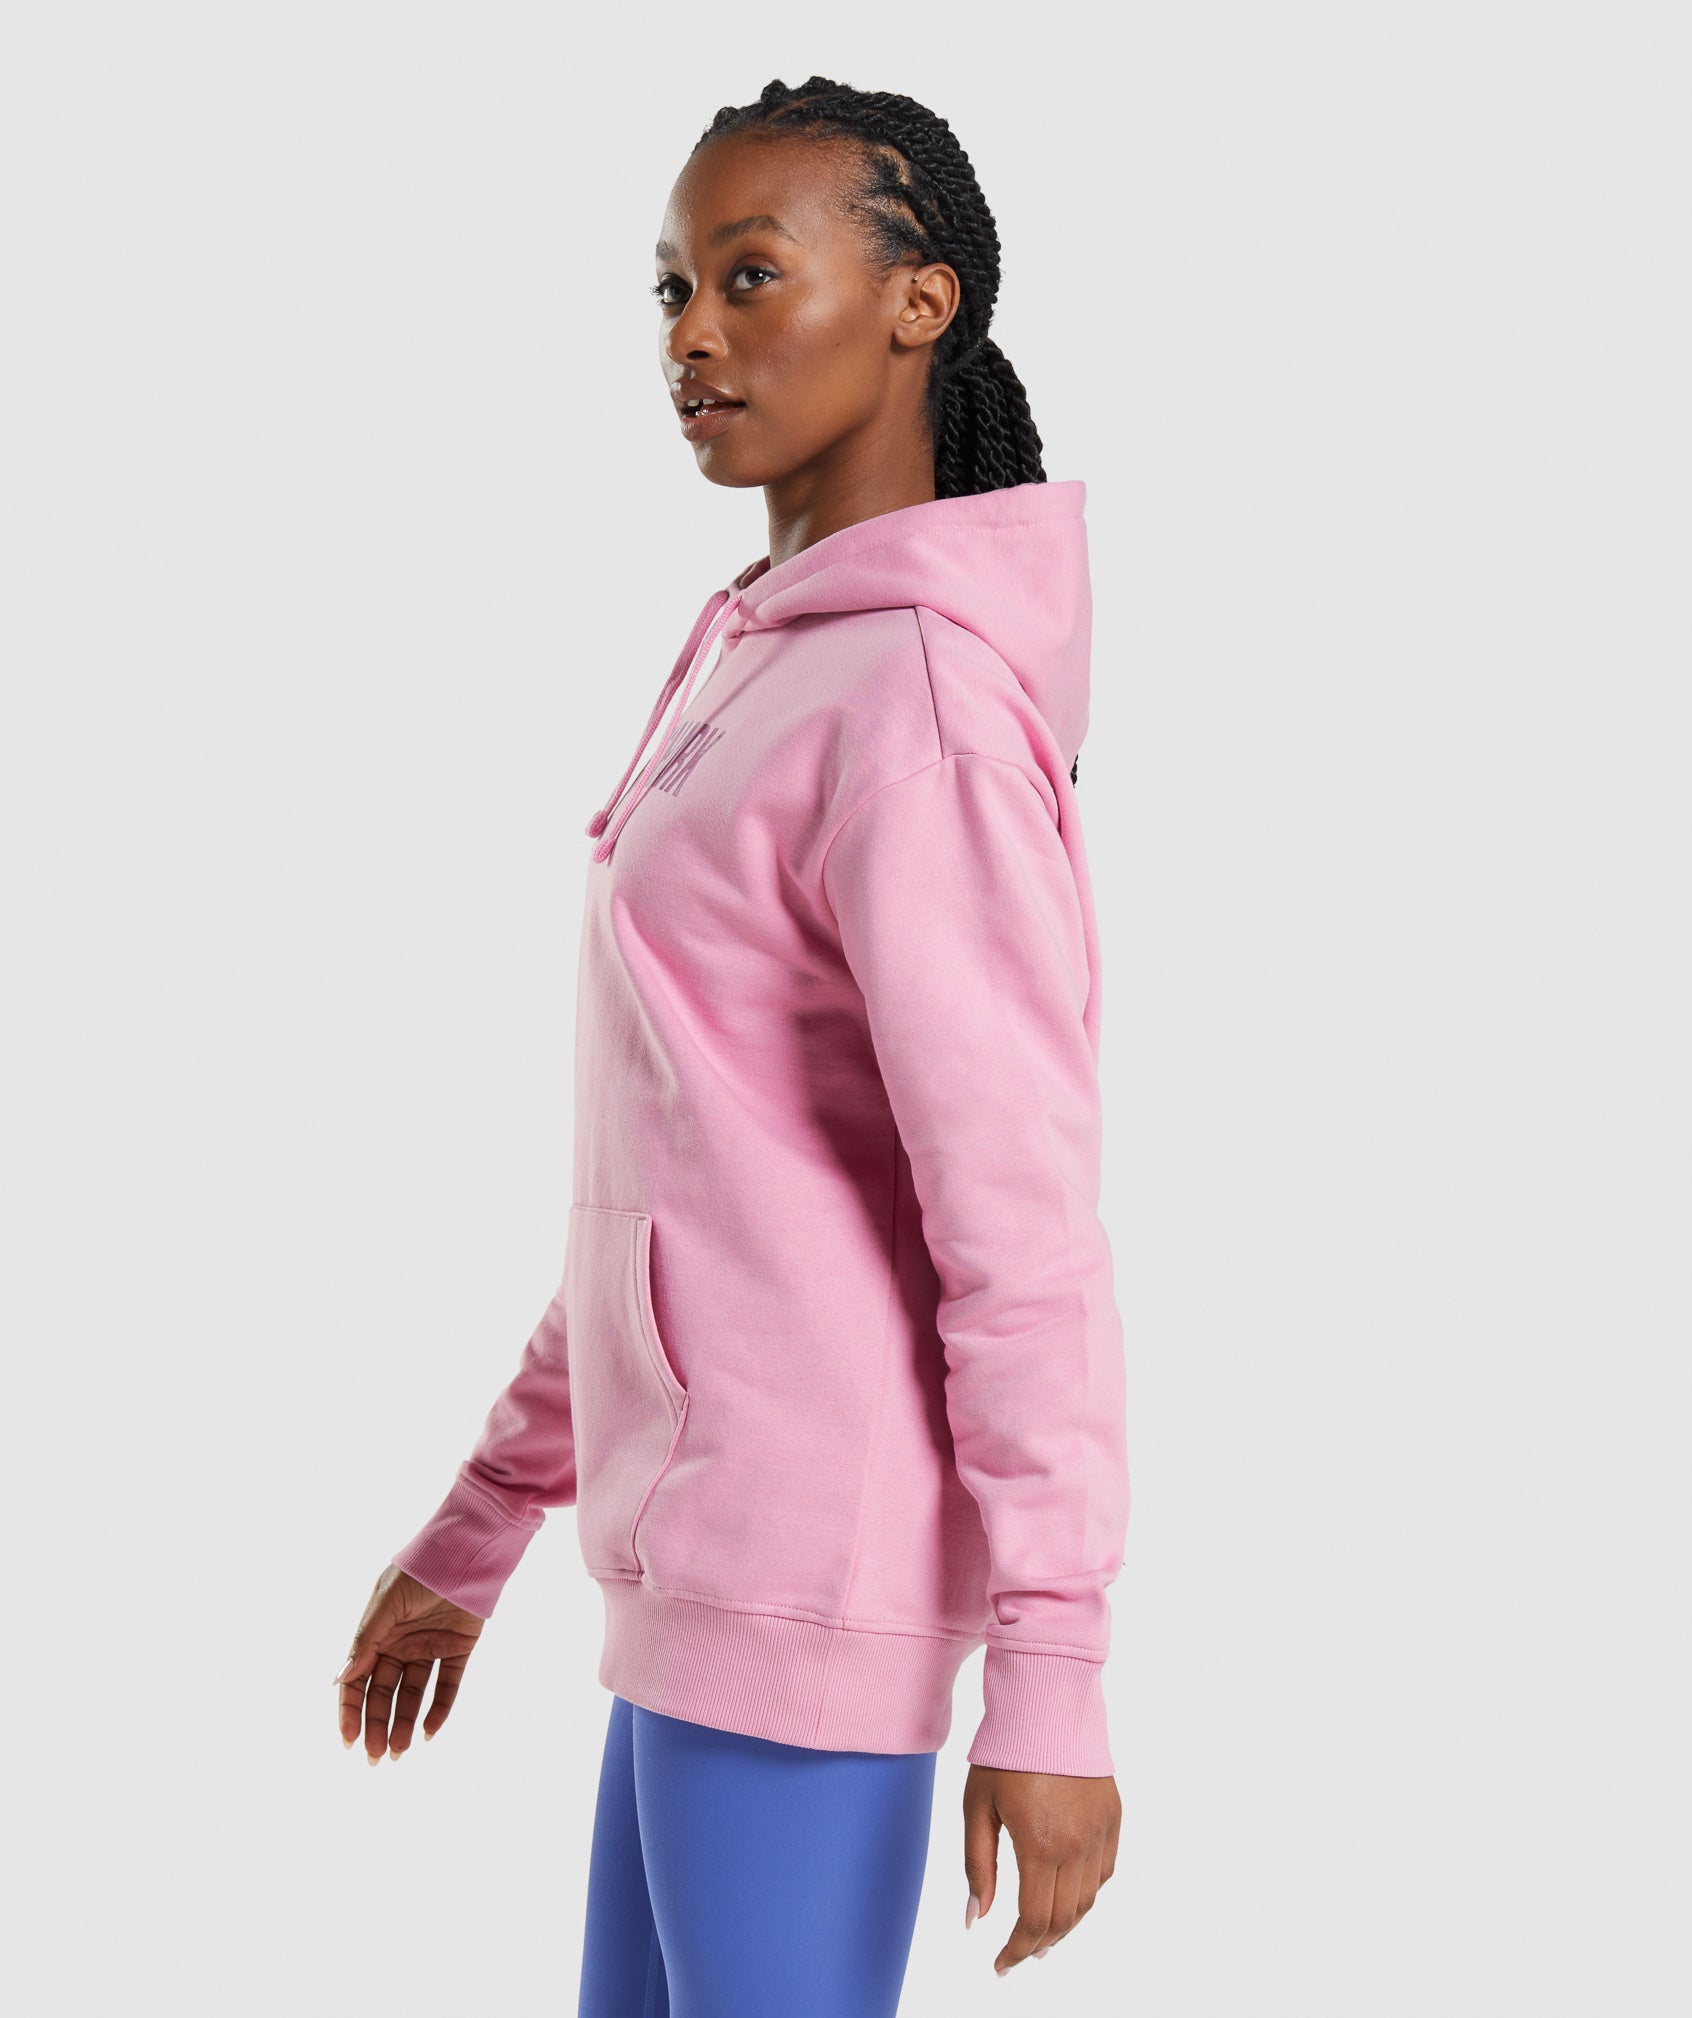 Apollo Oversized Hoodie in Sorbet Pink - view 3